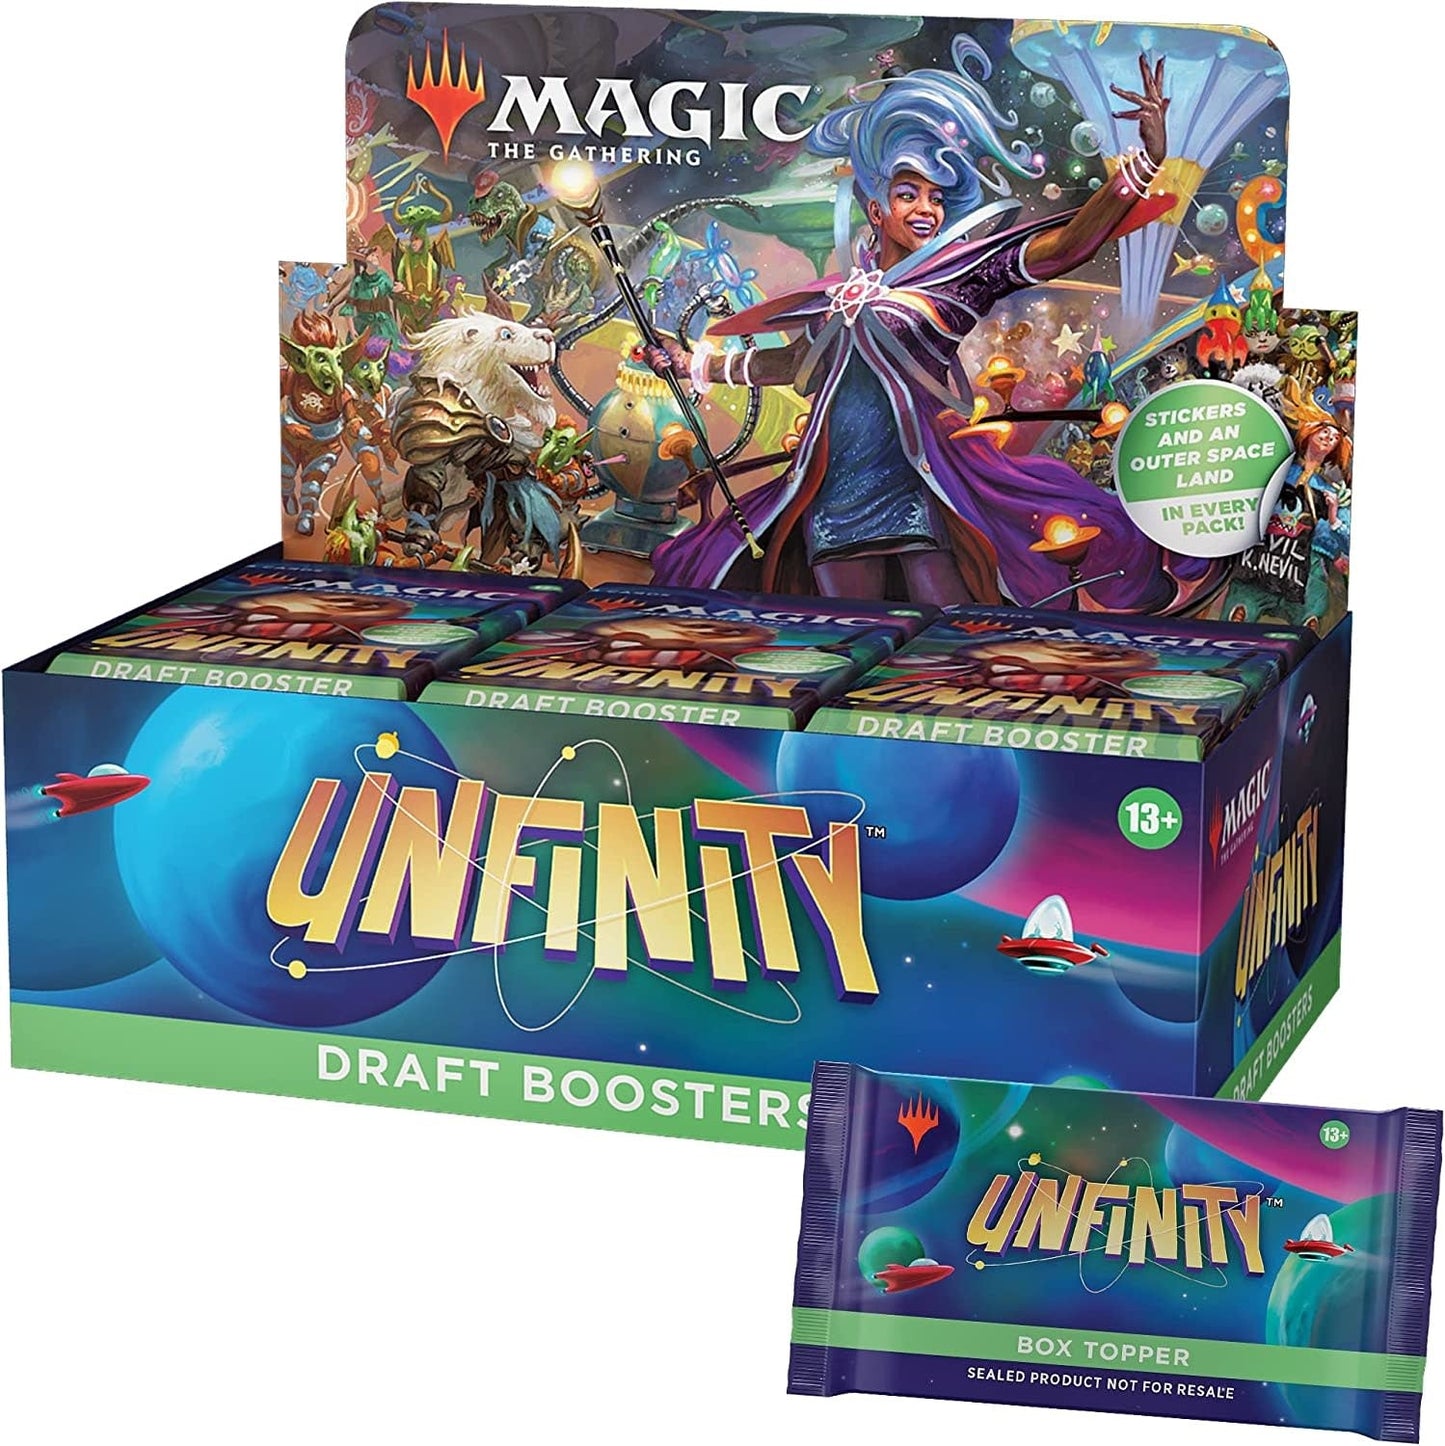 Unfinity - Magic The Gathering Booster Box (36 packs)